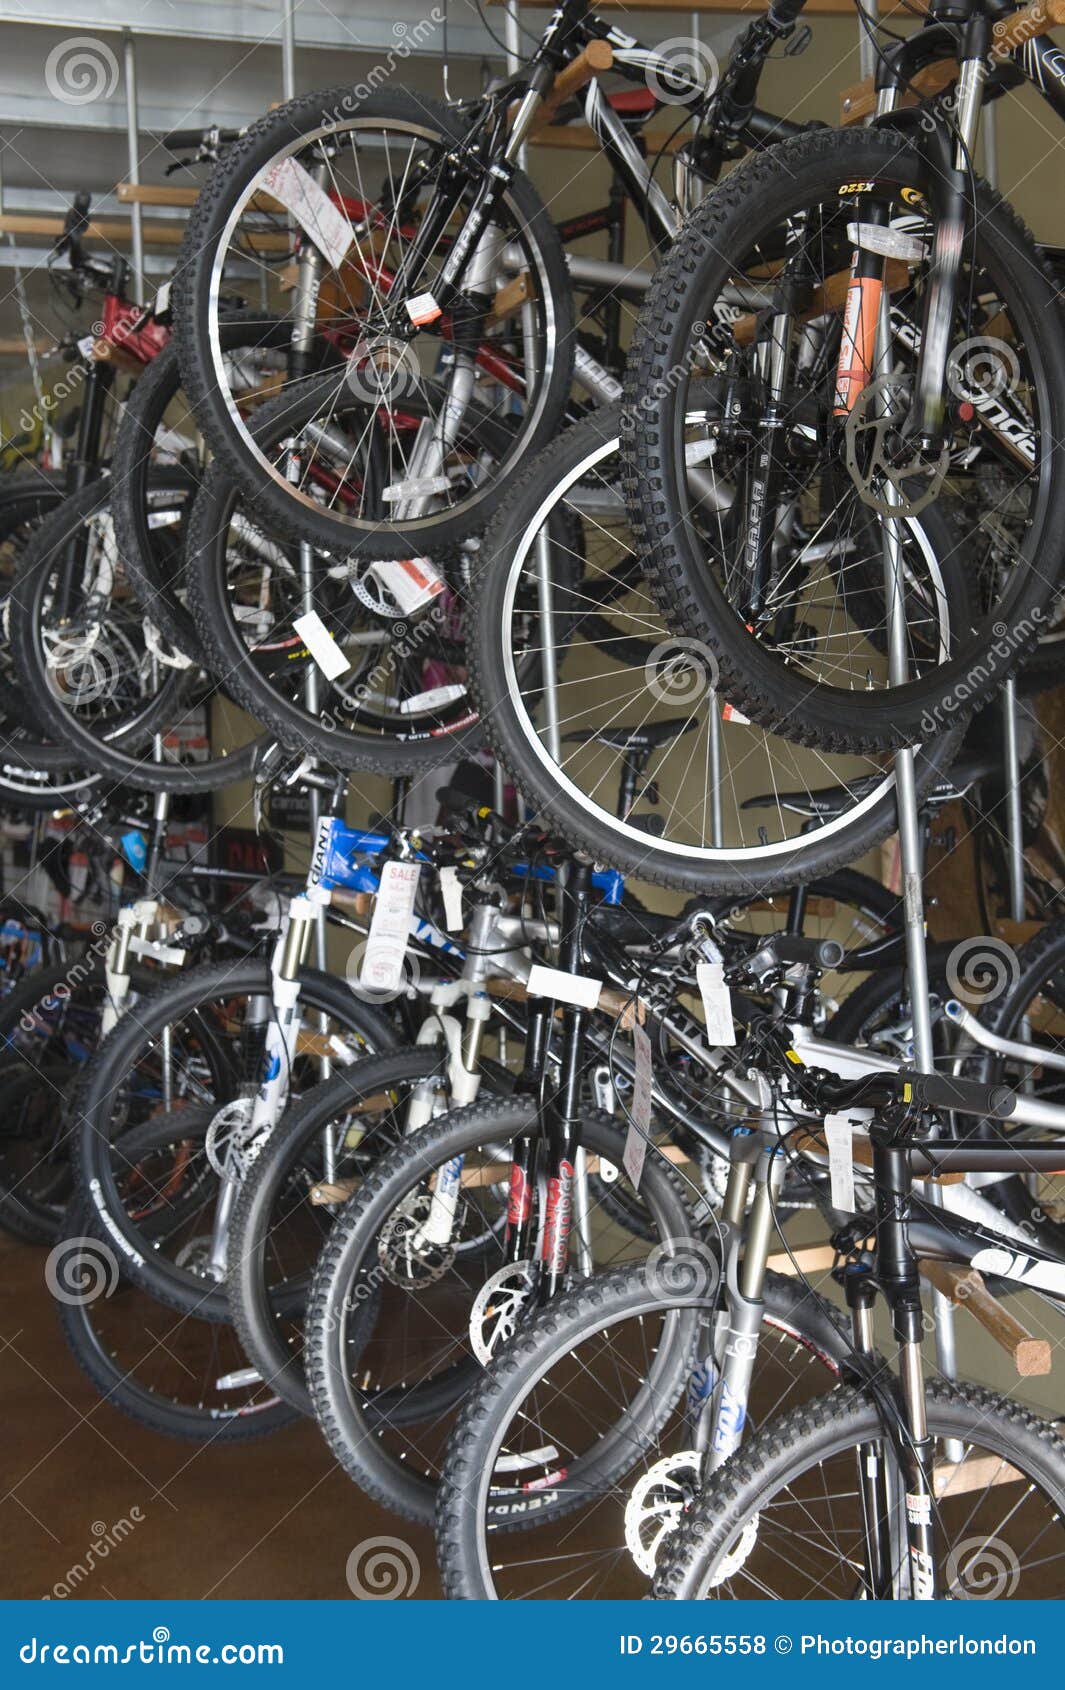 Cycles for Sale in Store stock photo